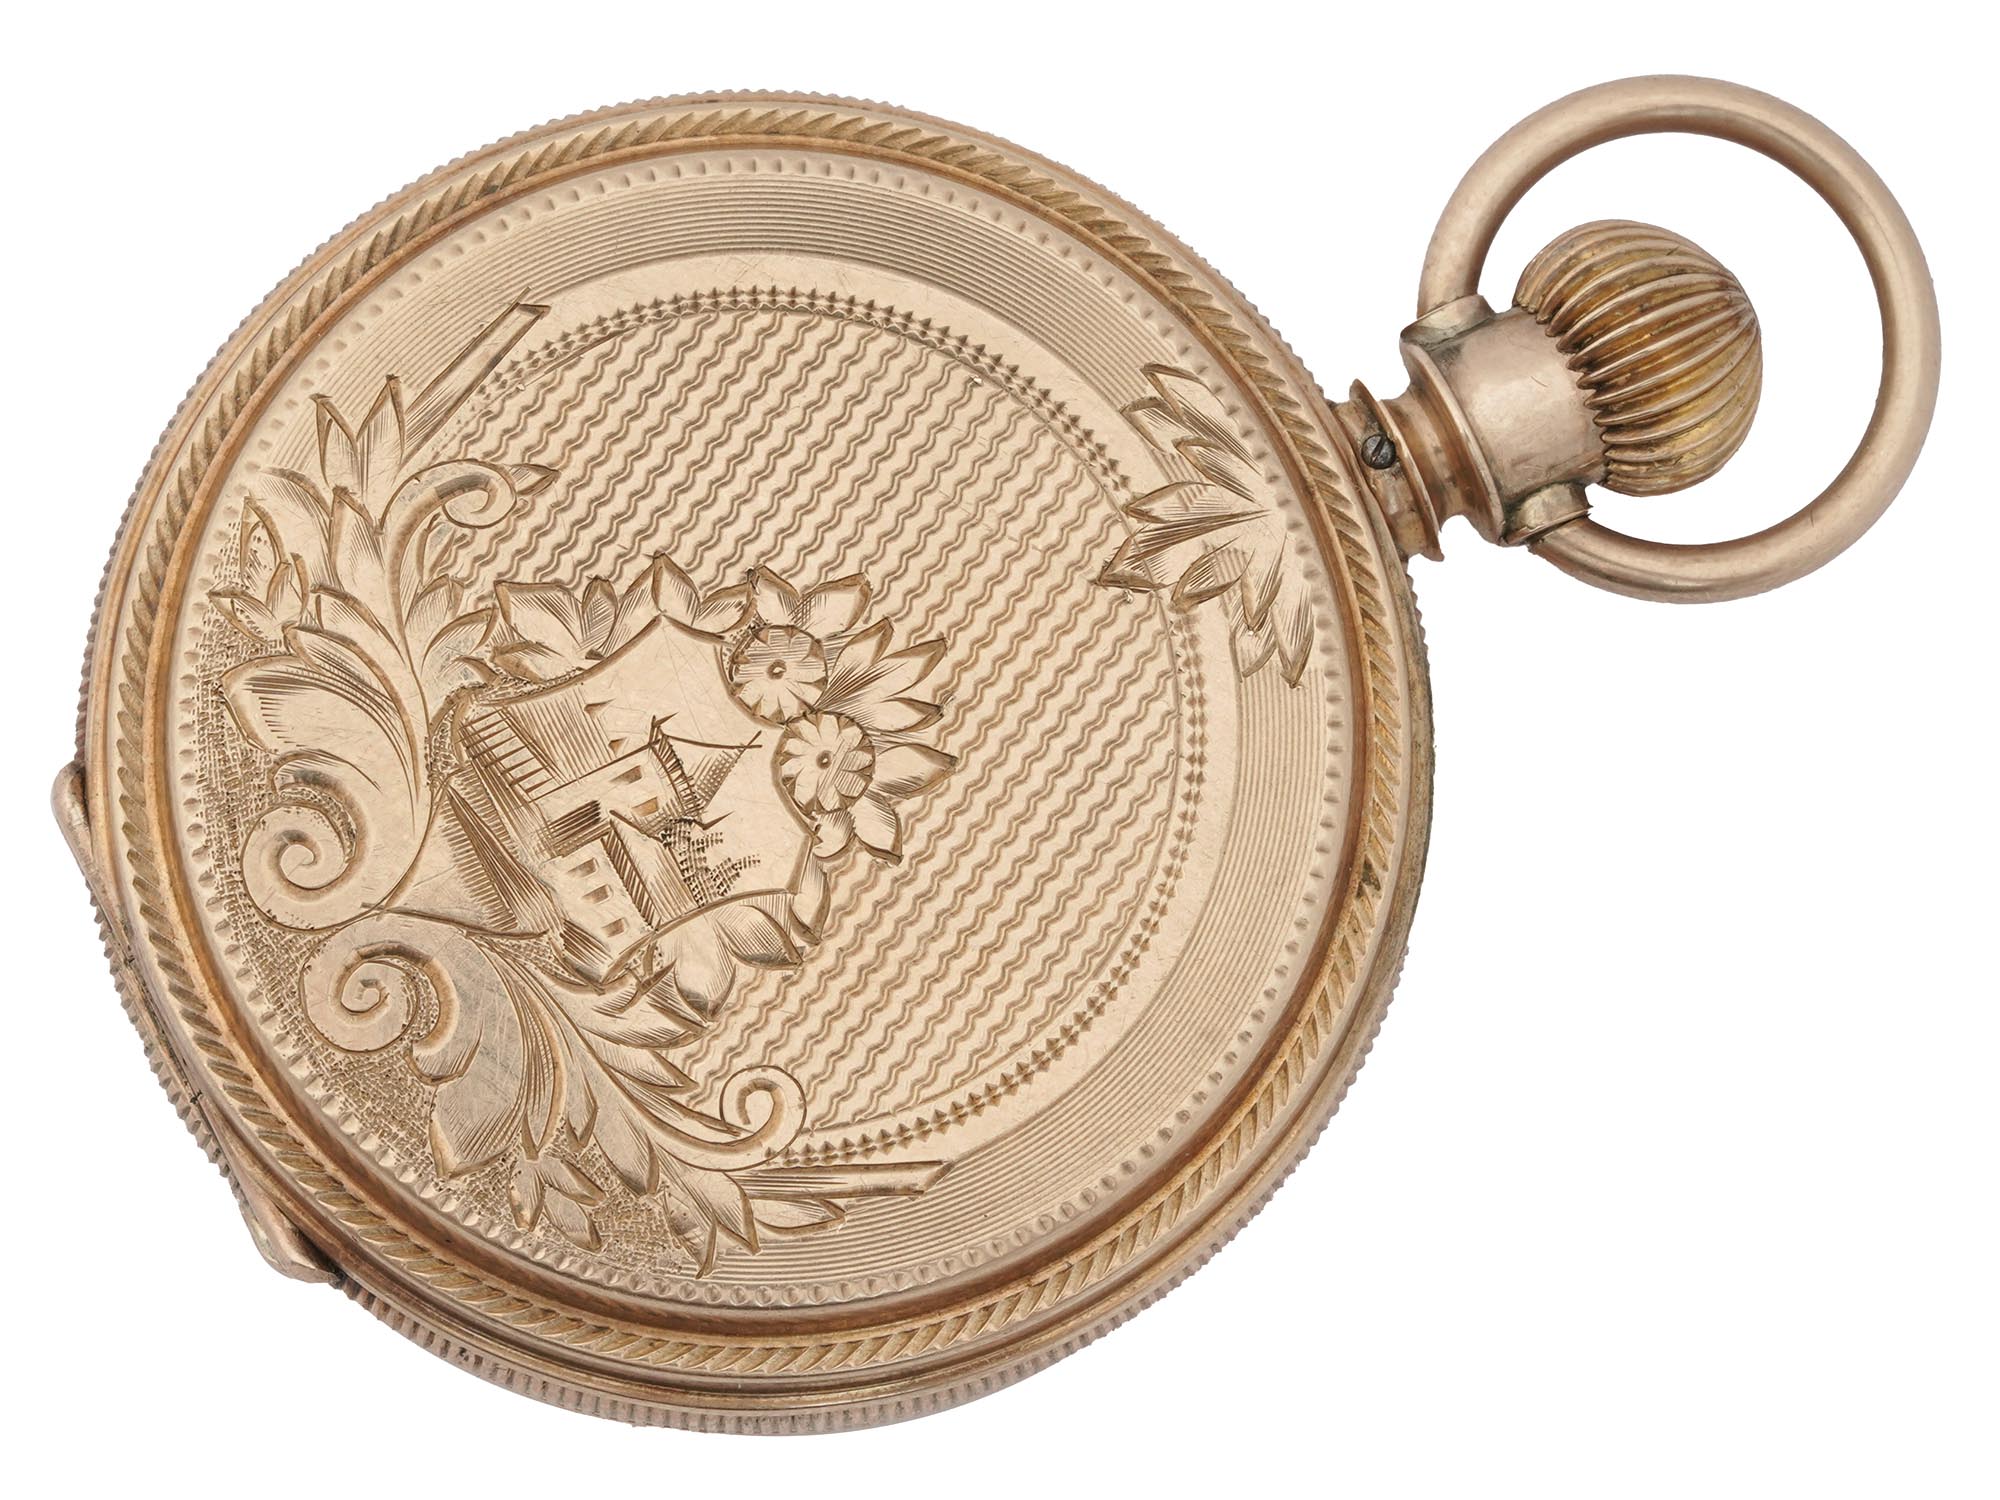 ANTIQUE 18K ROSE GOLD EMPIRE BWC CO POCKET WATCH PIC-2